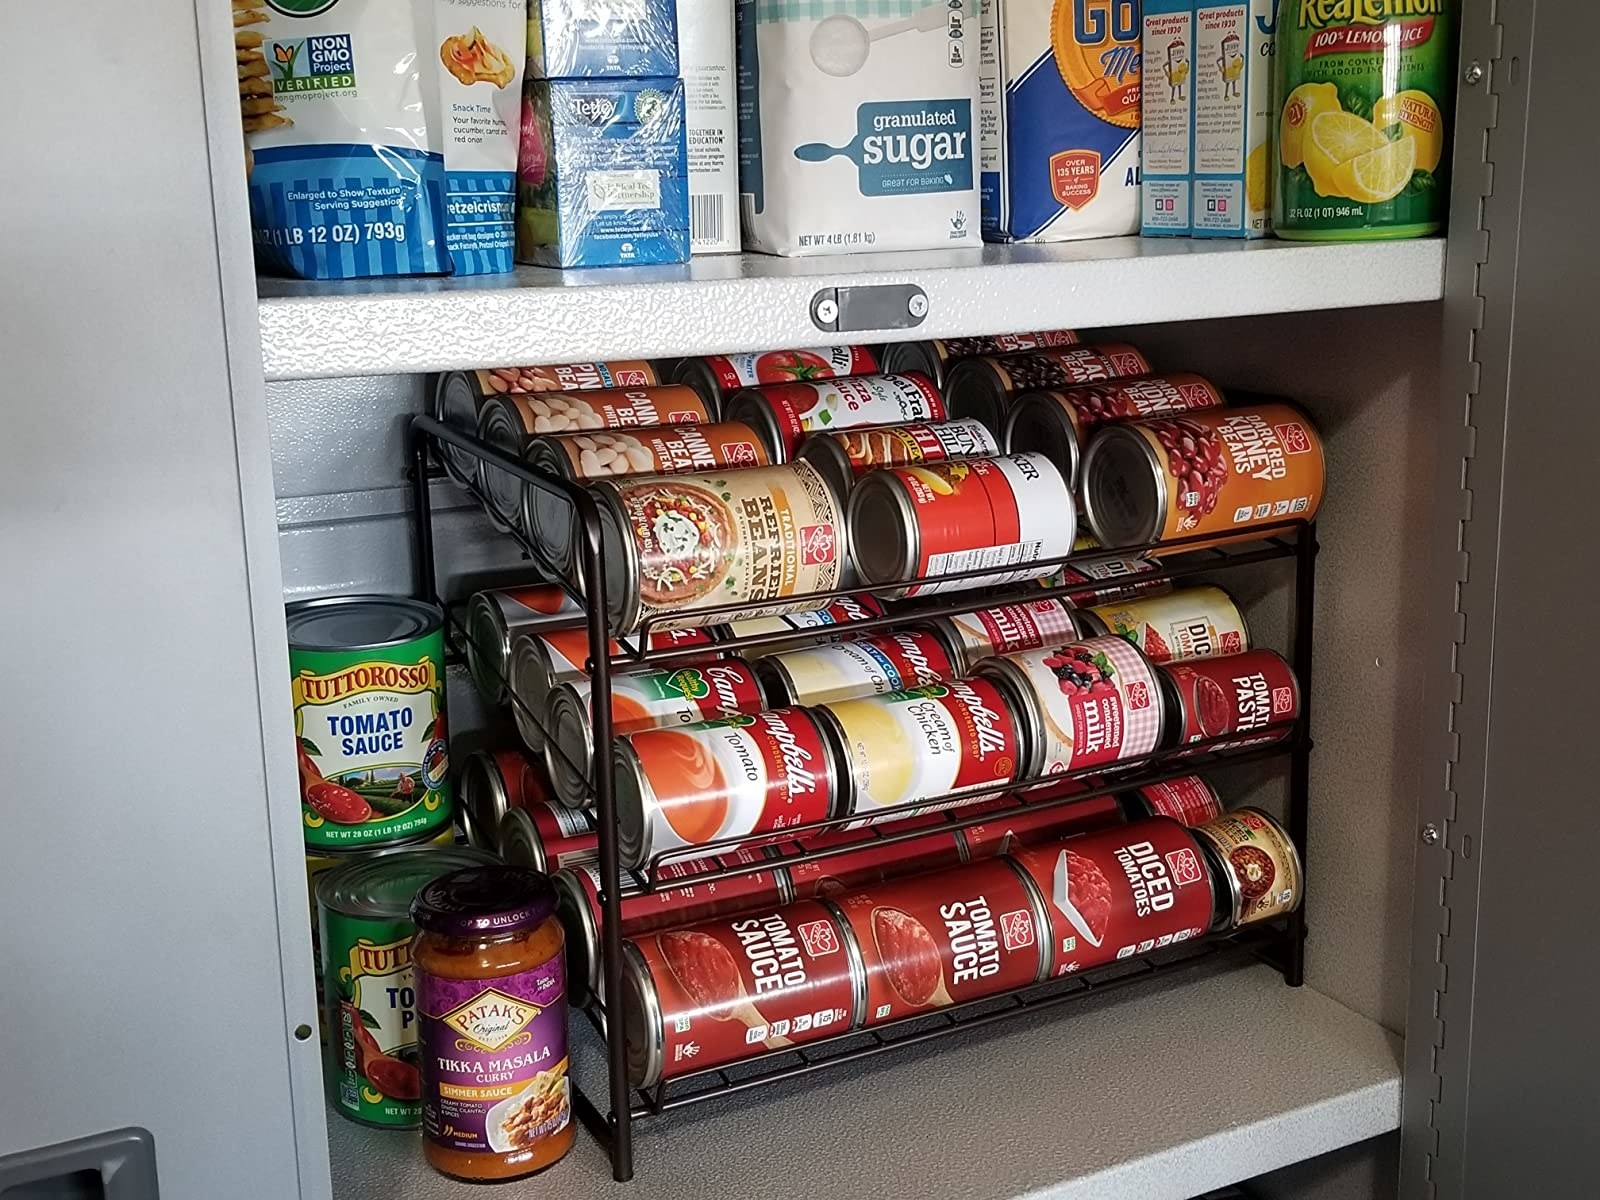 Cans placed in dispenser rack inside cabinet